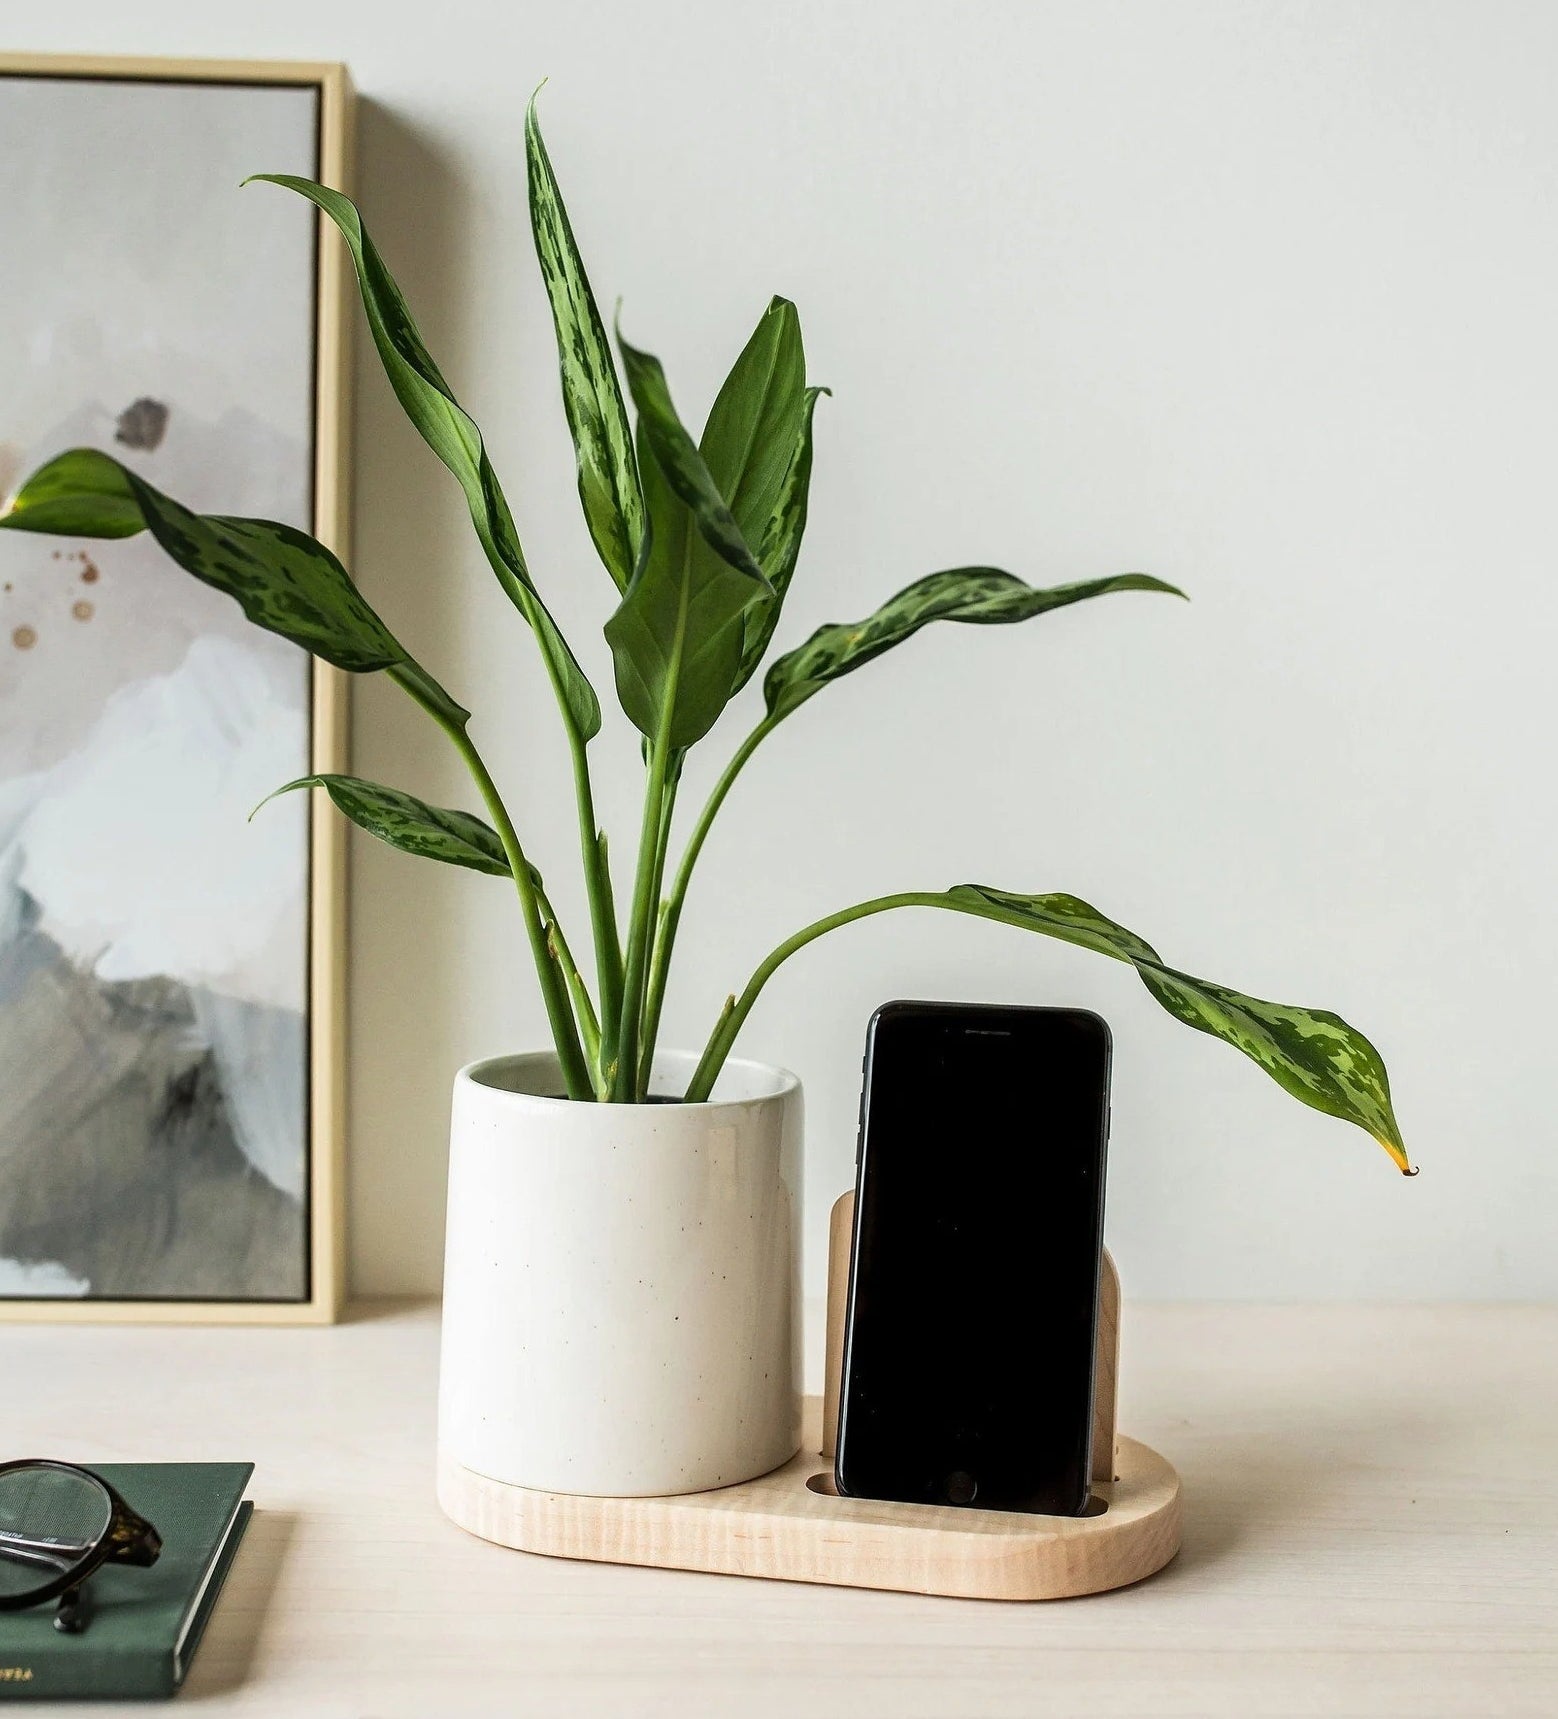 18 Stylish Plant Pots To Enhance Your Home Decor in 2021 – SPY